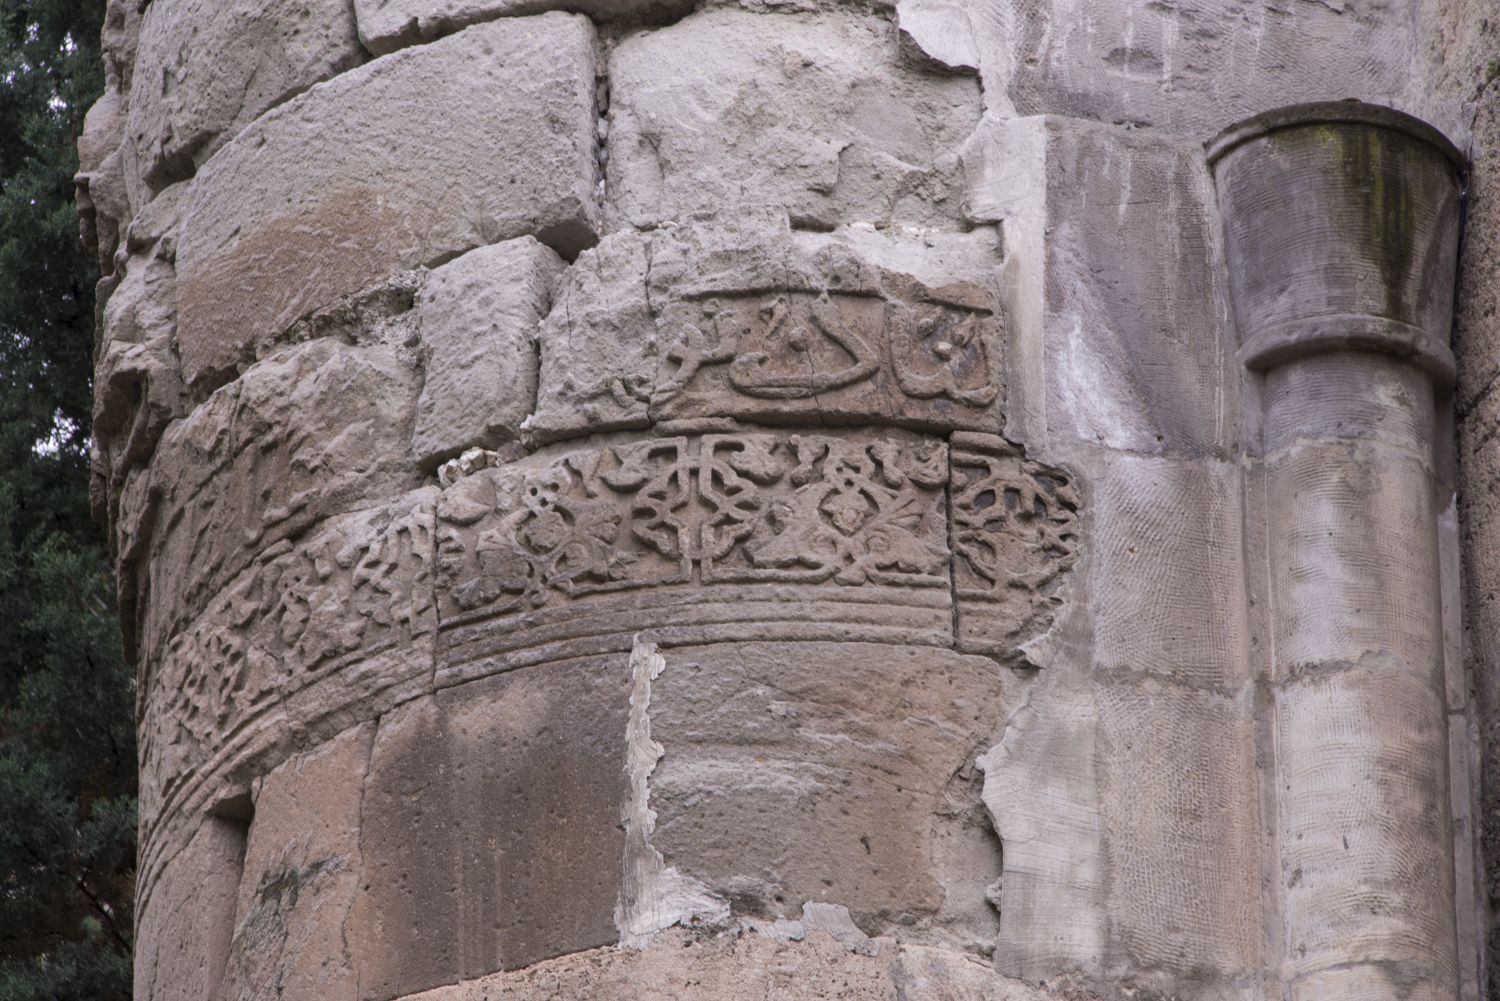 View of frieze bands decorating one of the monumental engaged pillars framing the building's south facade.